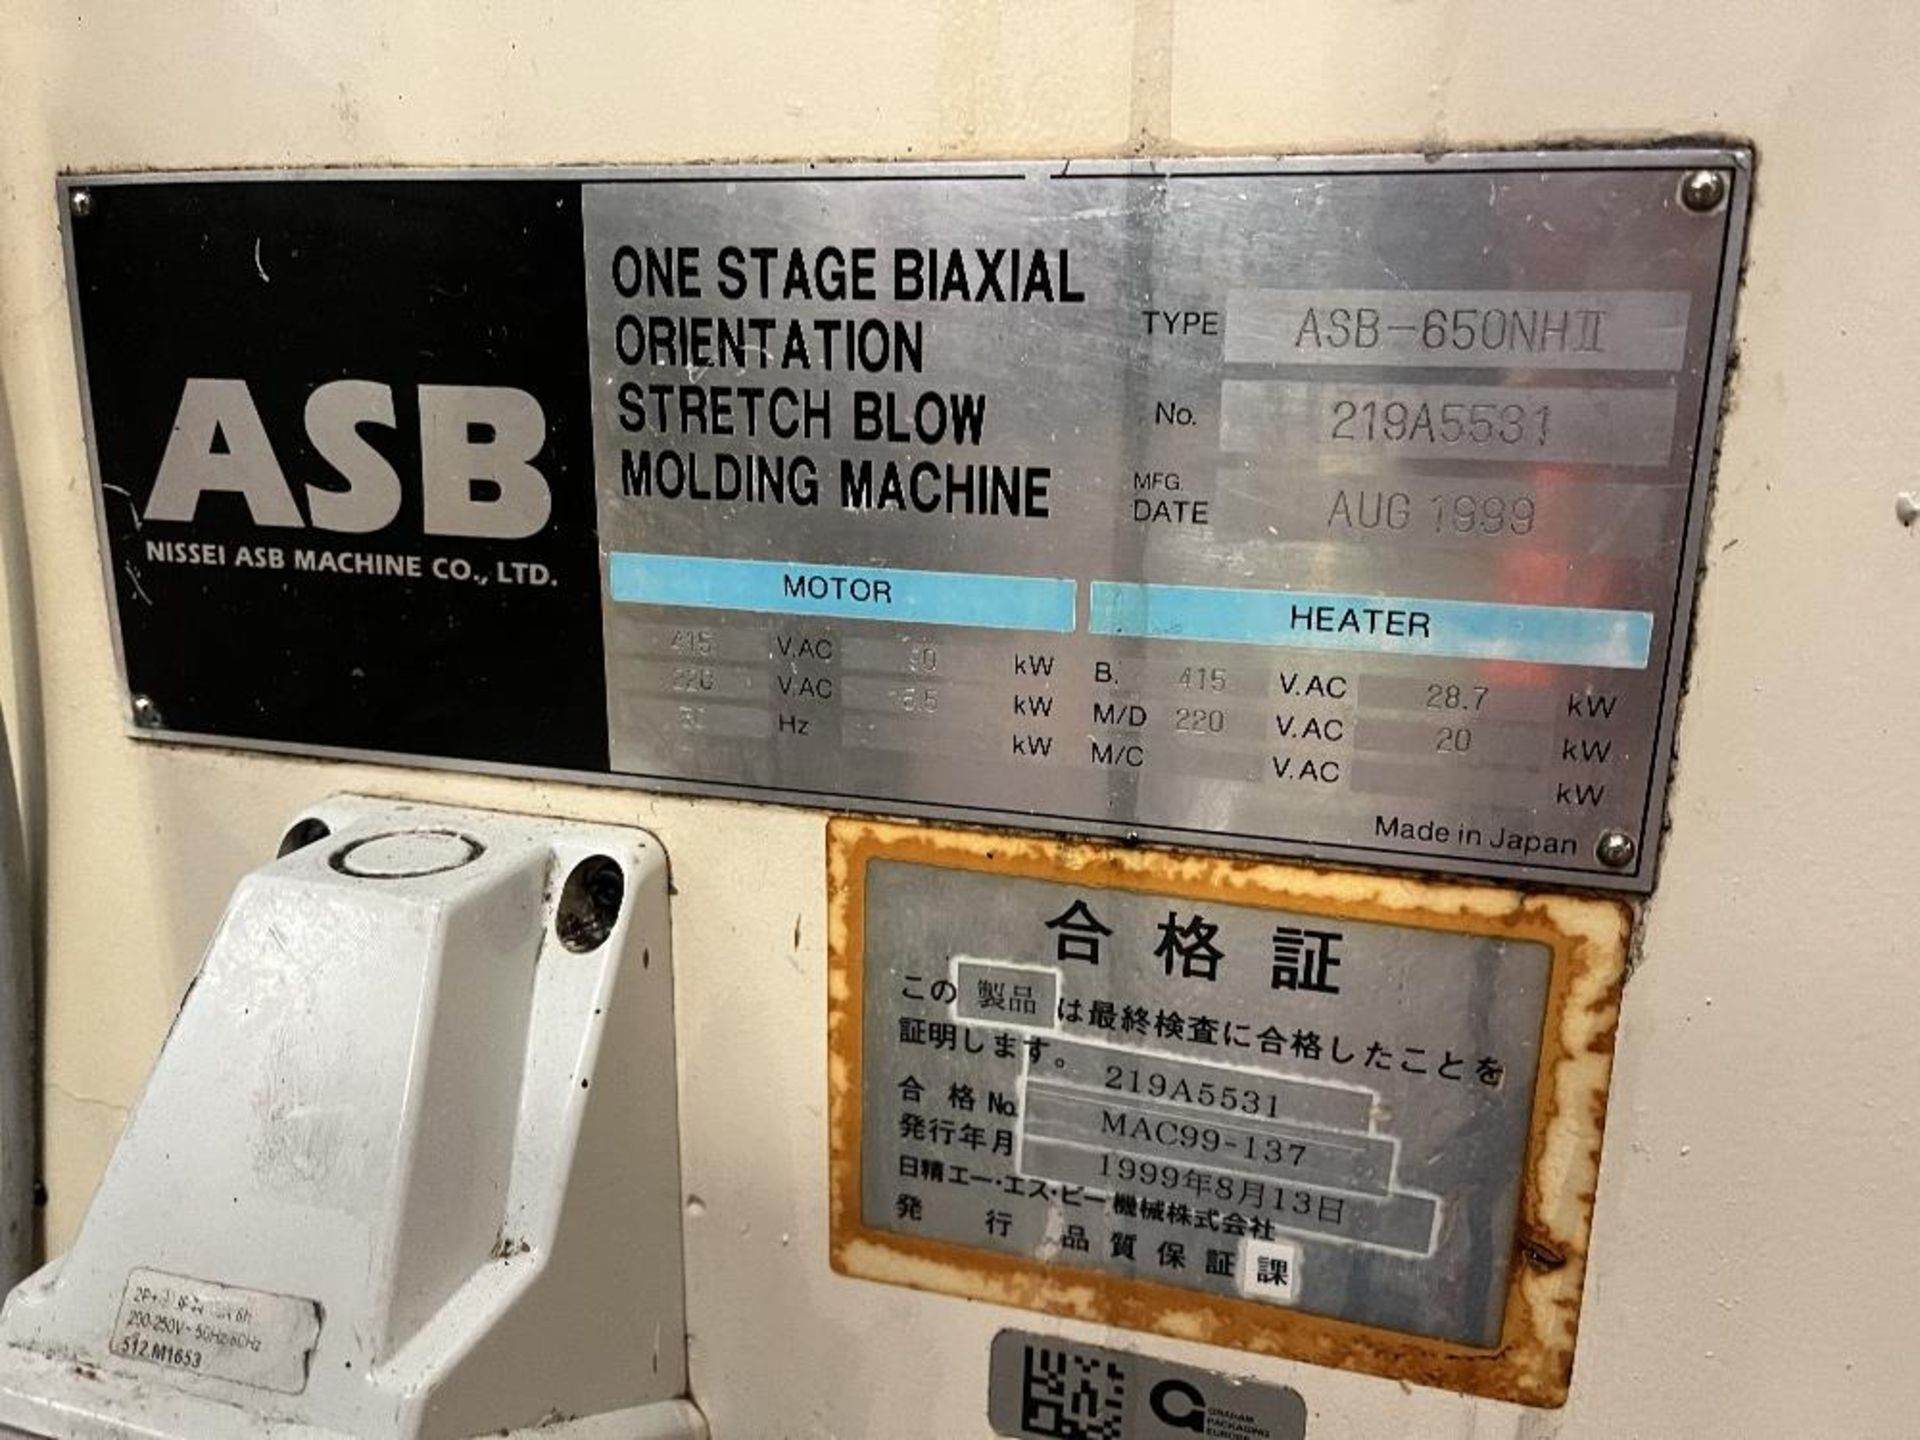 Nissei ASB Machine Co Ltd One Stage biaxial orientation blow molding machine - Image 2 of 17